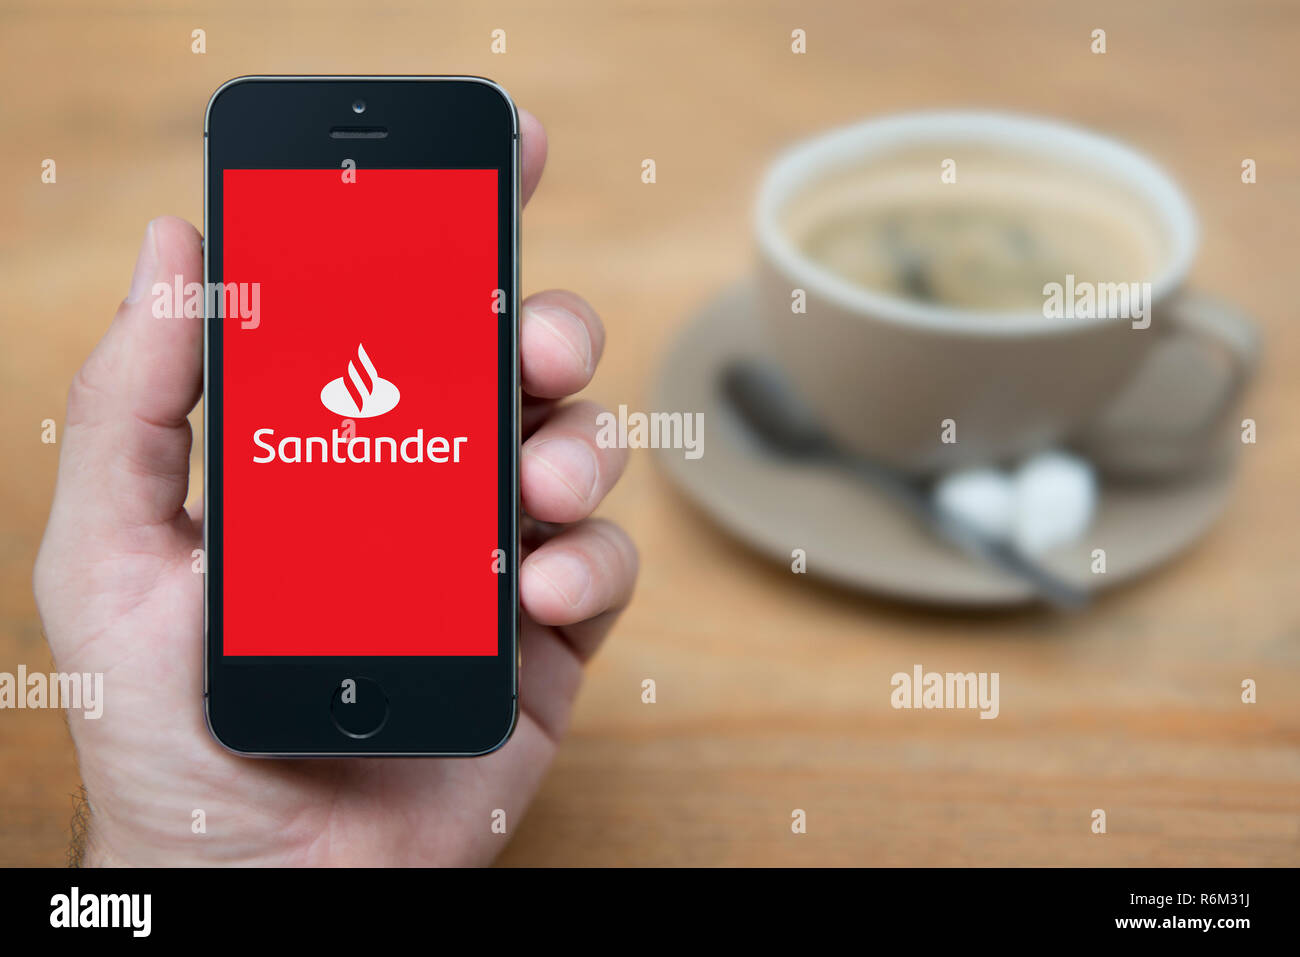 A man looks at his iPhone which displays the Santander bank logo (Editorial use only). Stock Photo